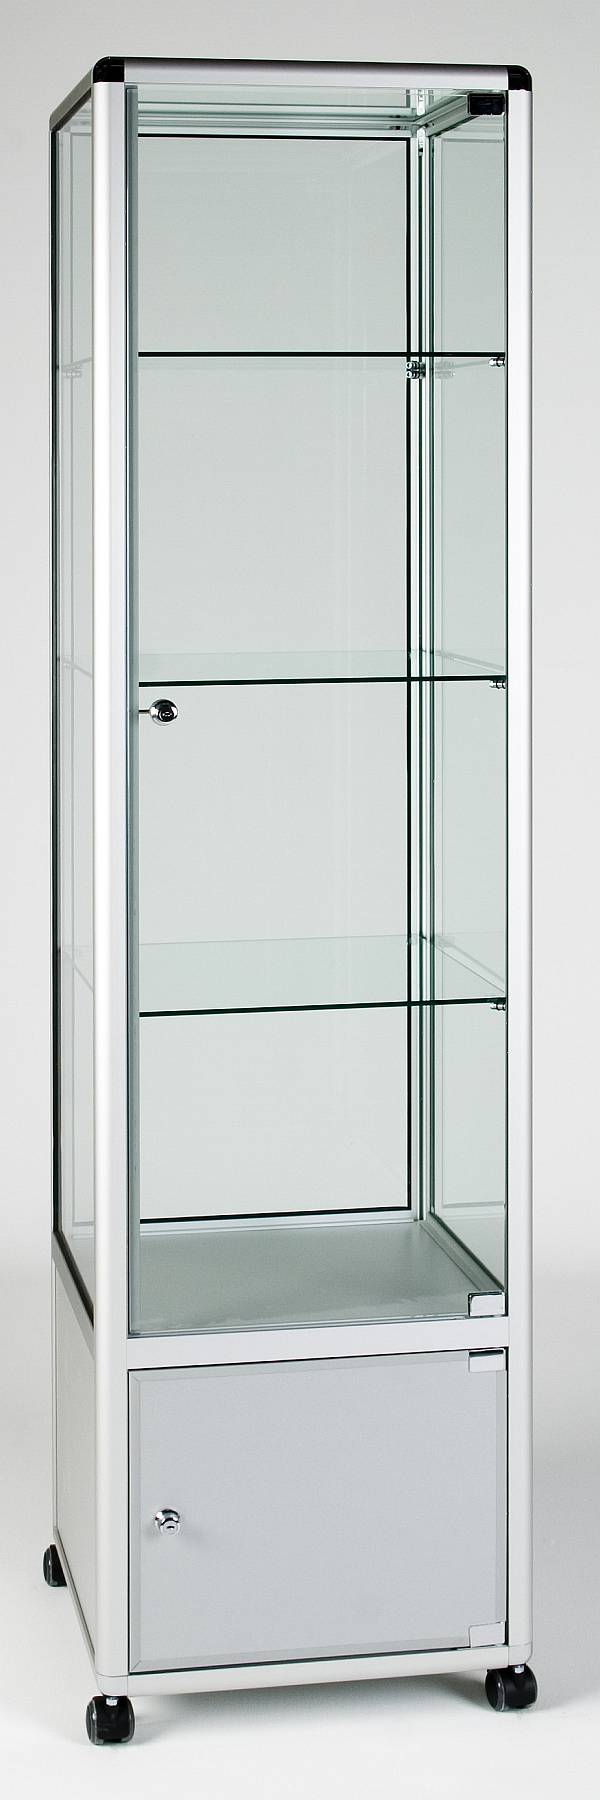 GS3001 glass display cabinet